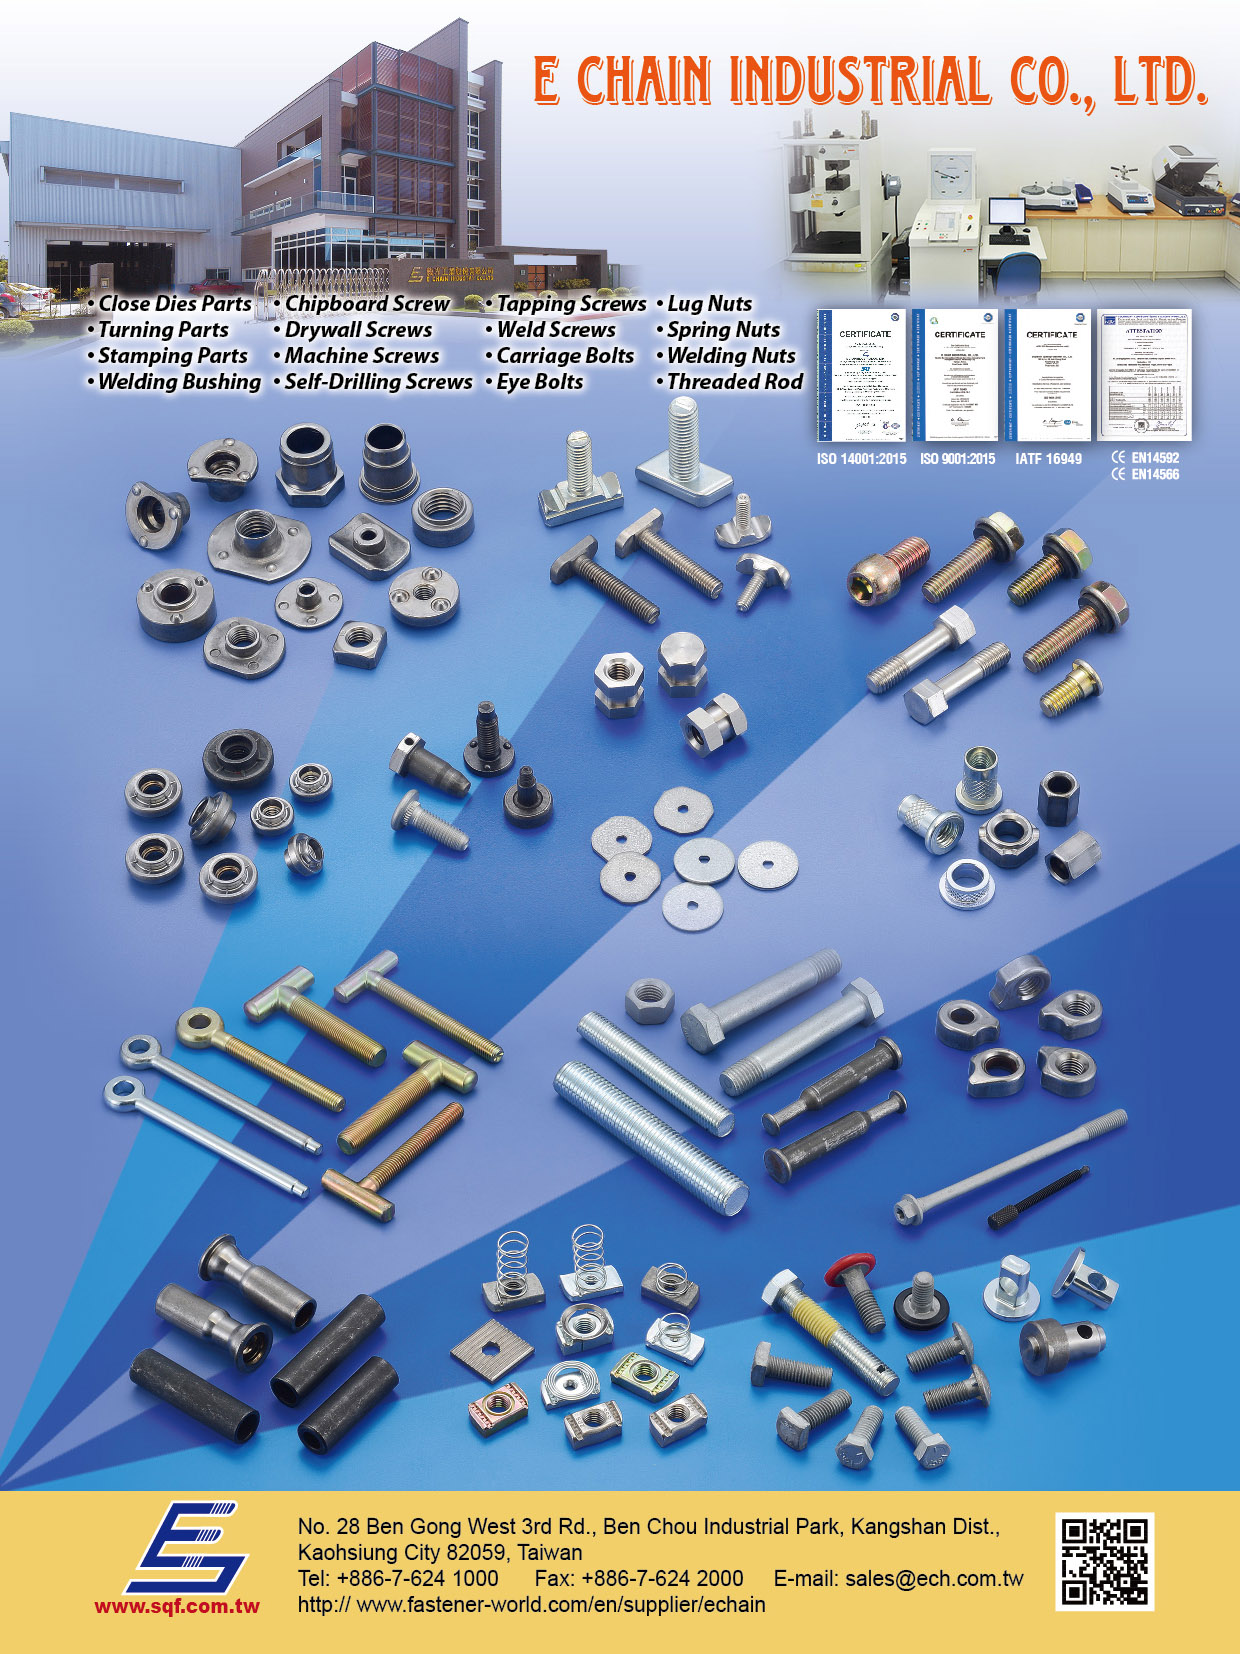 E CHAIN INDUSTRIAL CO., LTD. , Close Dies Parts, Chipboard Screws, Tapping Screws, Lug Nuts, Turning Parts, Drywall Screws, Weld Screws, Spring Nuts, Stamping Parts, Machine Screws, Carriage Bolts, Welding Nuts, Welding Bushing, Self-Driling Screws, Eye Bolts, Threaded Rod